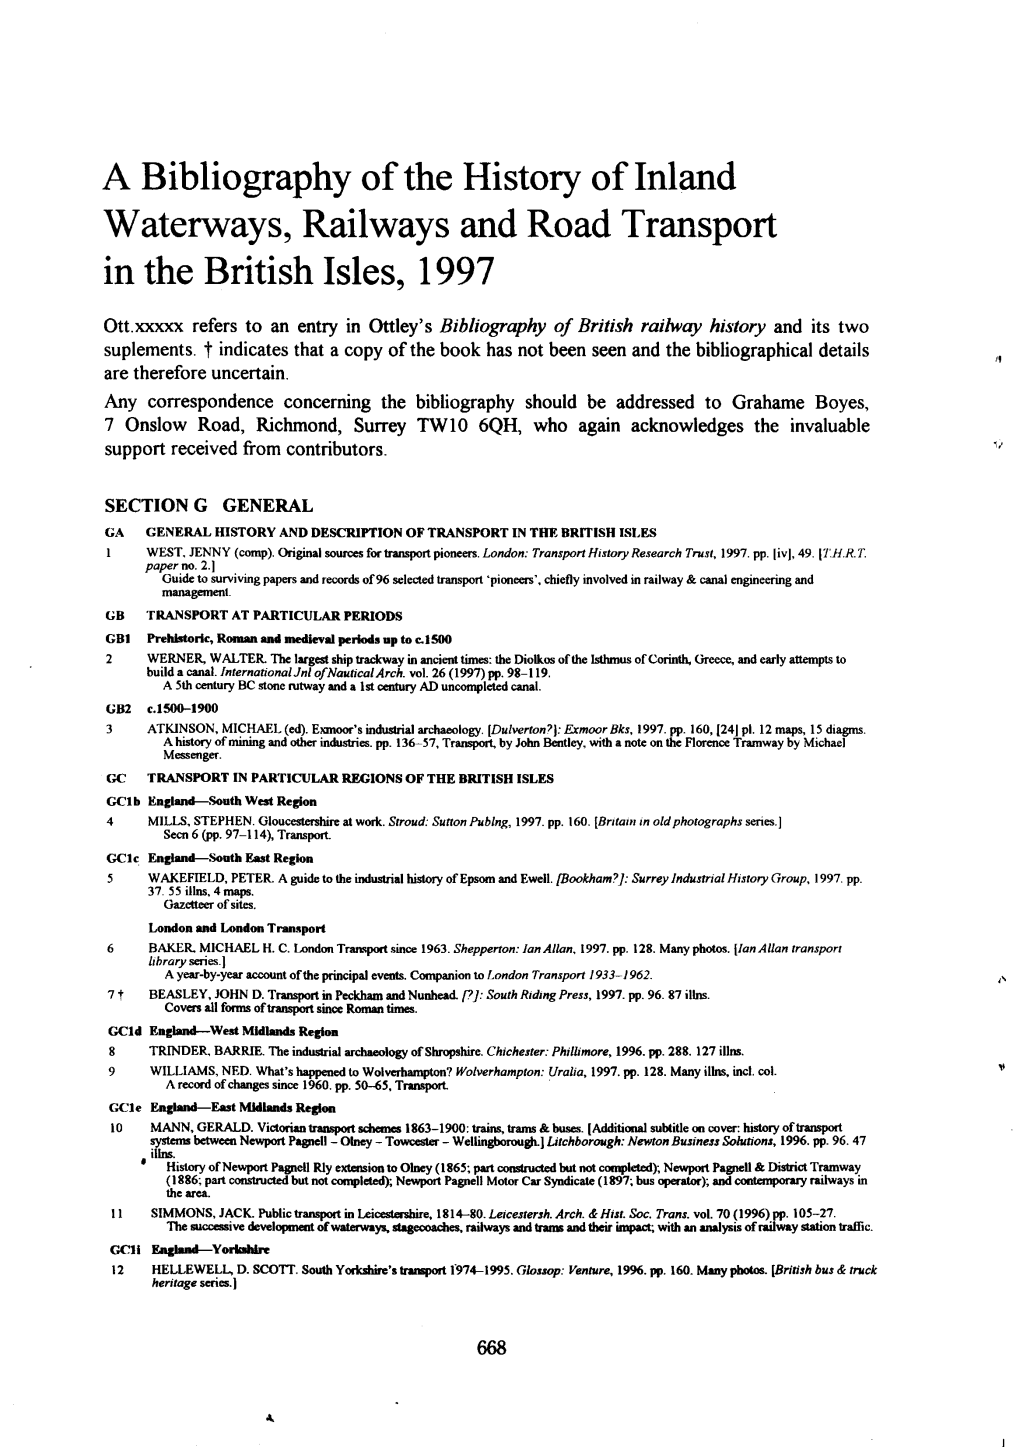 A Bibliography of the History of Inland Waterways, Railways and Road Transport in the British Isles, 1997